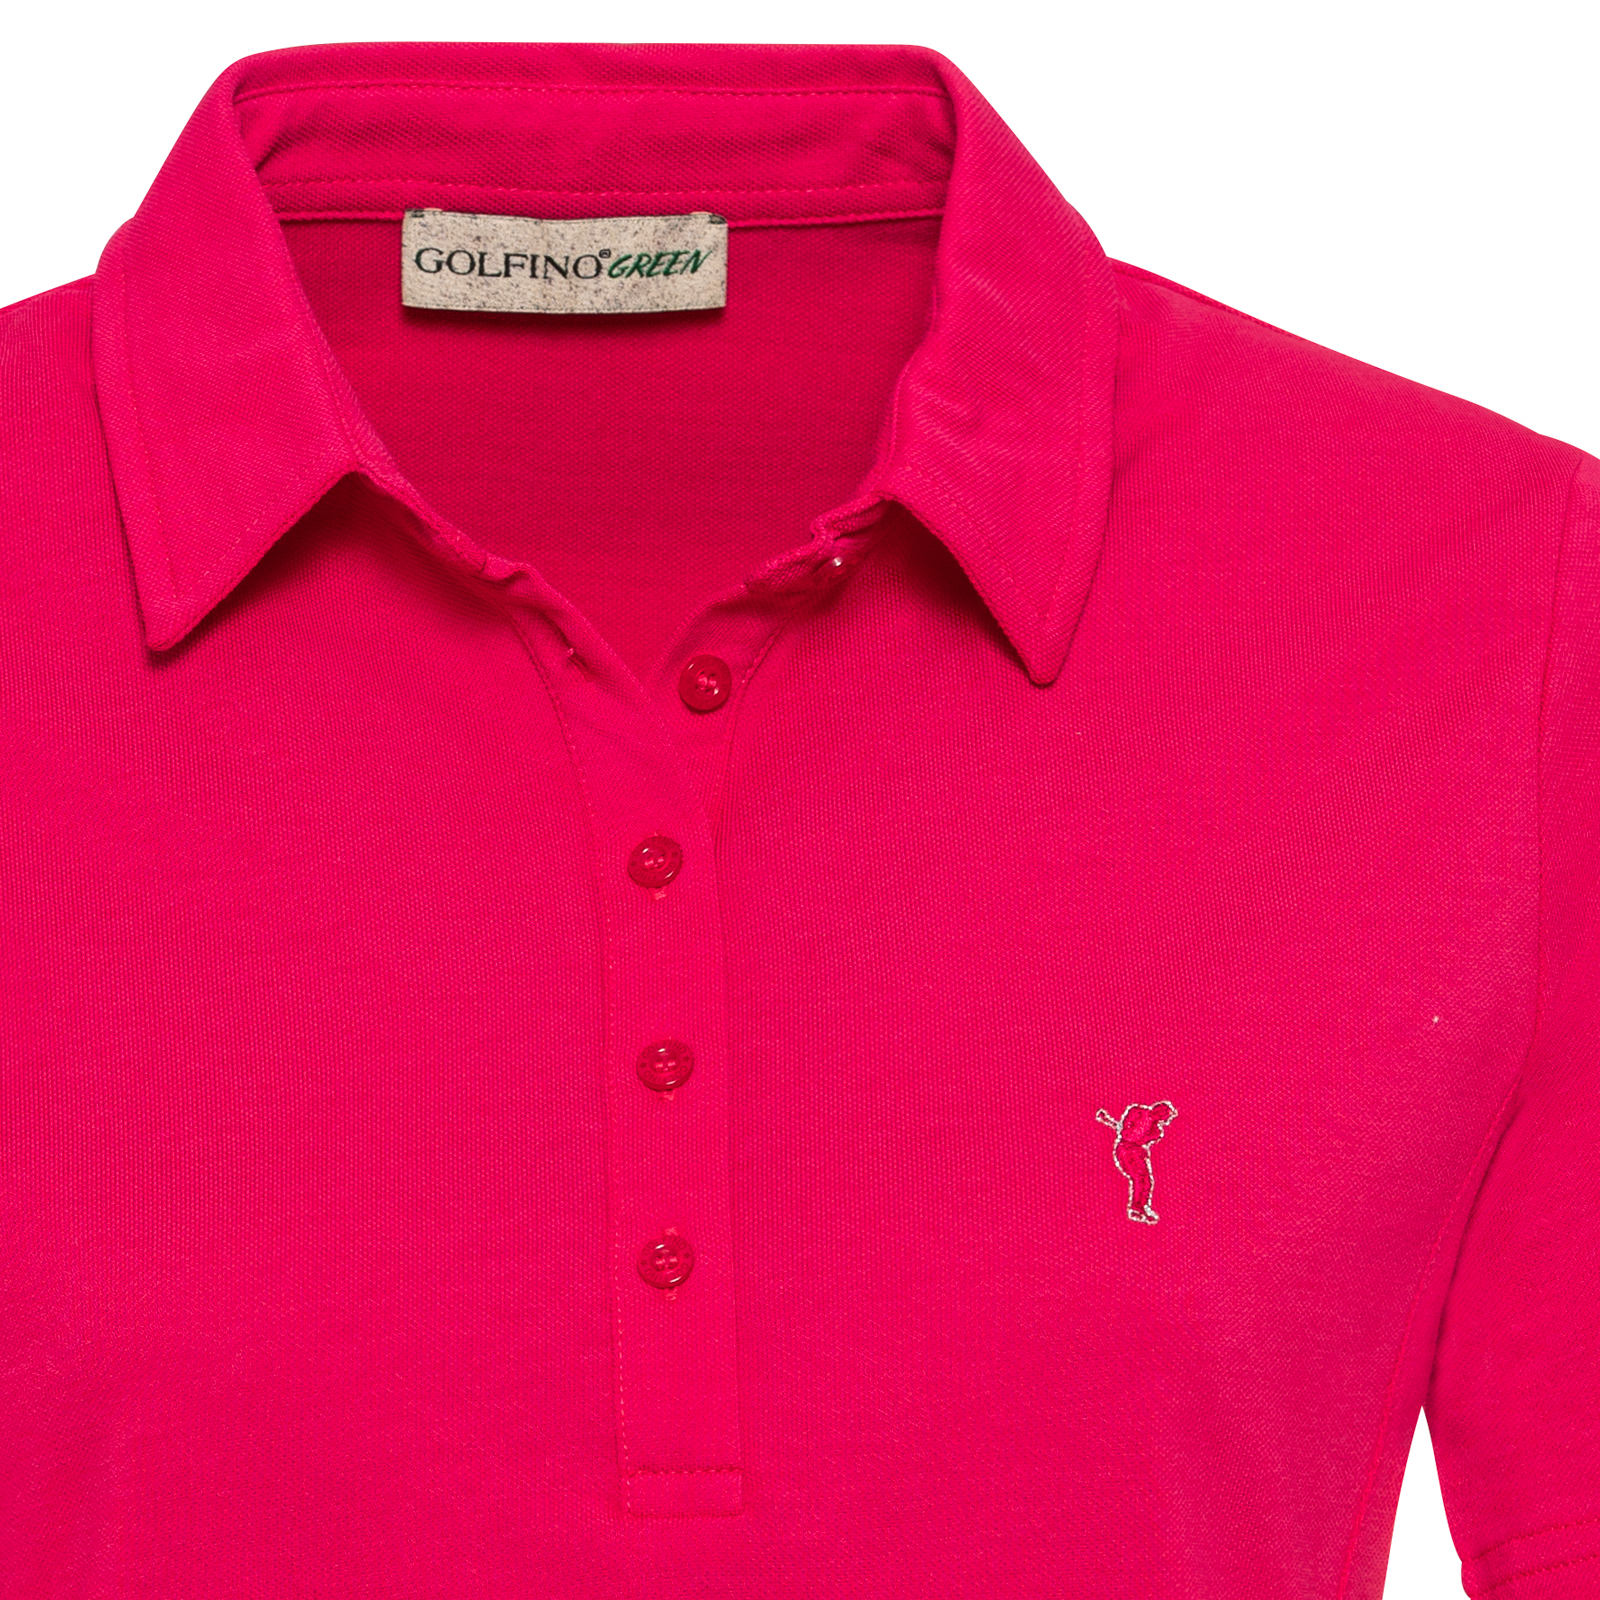 Sustainably produced ladies' golf top